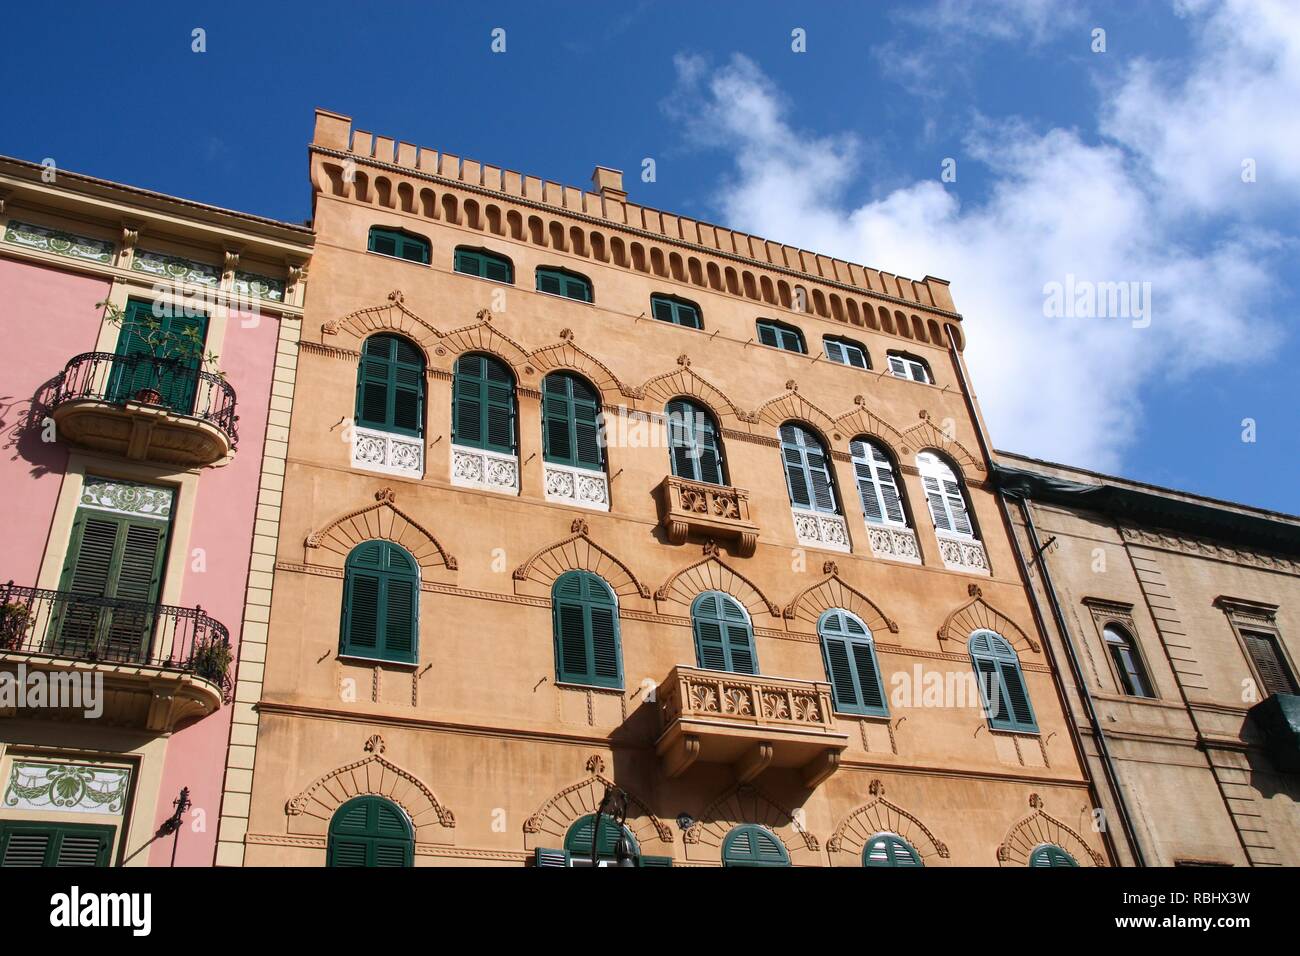 Palermo, town of Sicily island in Italy. Old palace, apartment building. Stock Photo